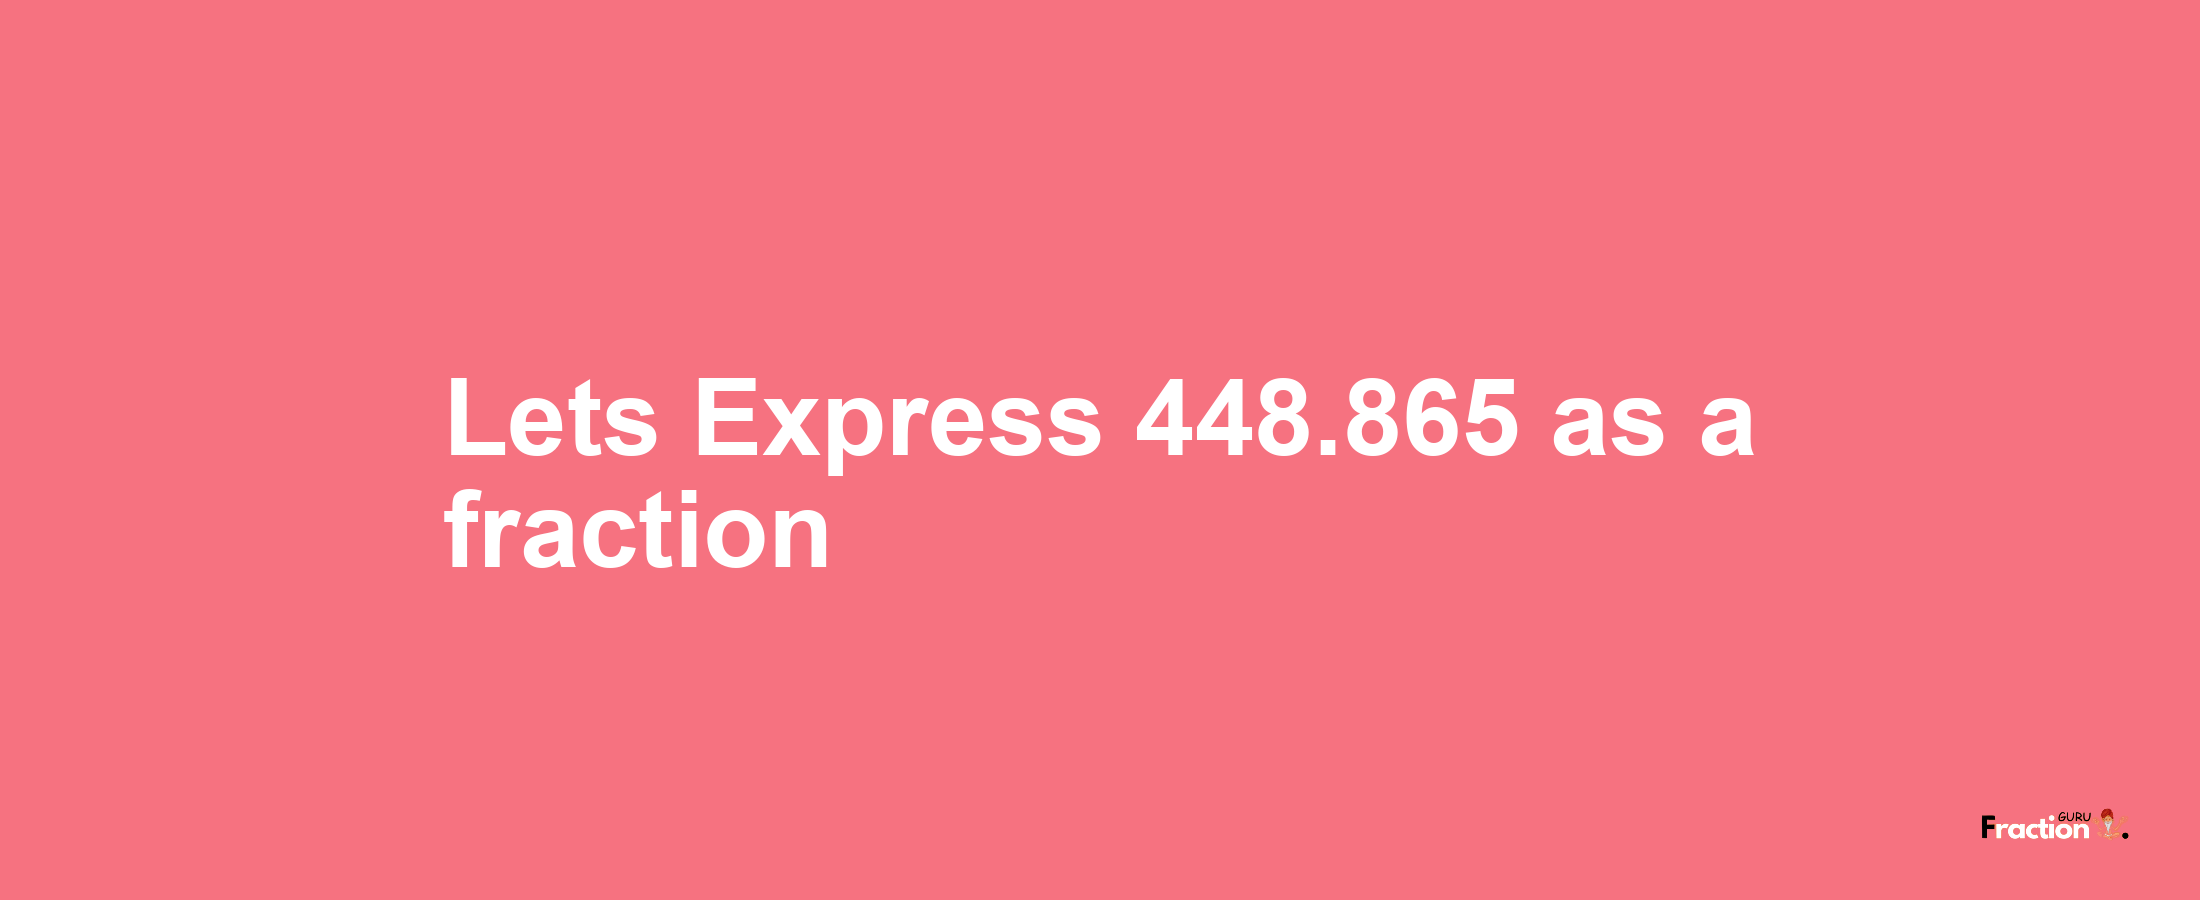 Lets Express 448.865 as afraction